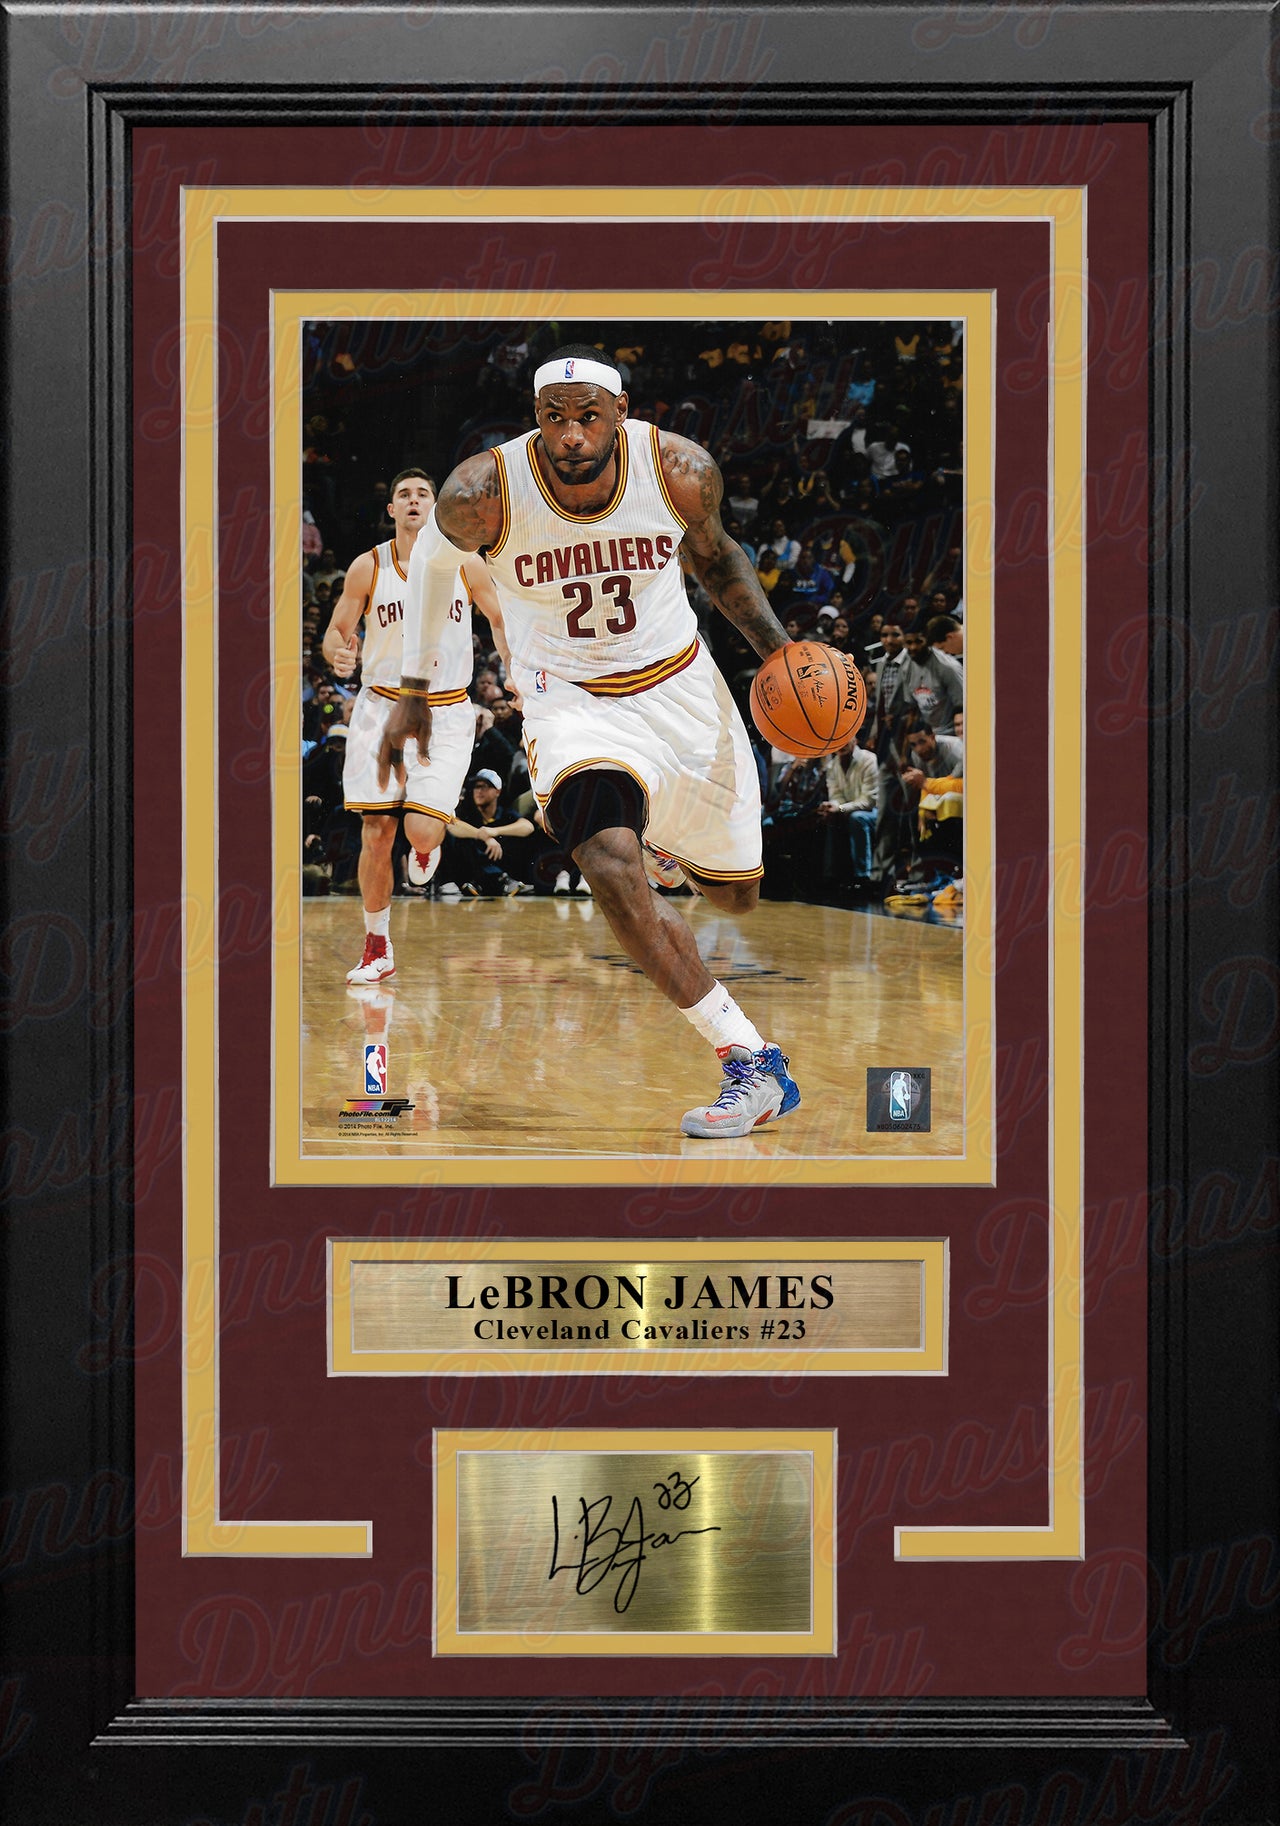 LeBron James in Action Cleveland Cavaliers 8" x 10" Framed Basketball Photo with Engraved Autograph - Dynasty Sports & Framing 